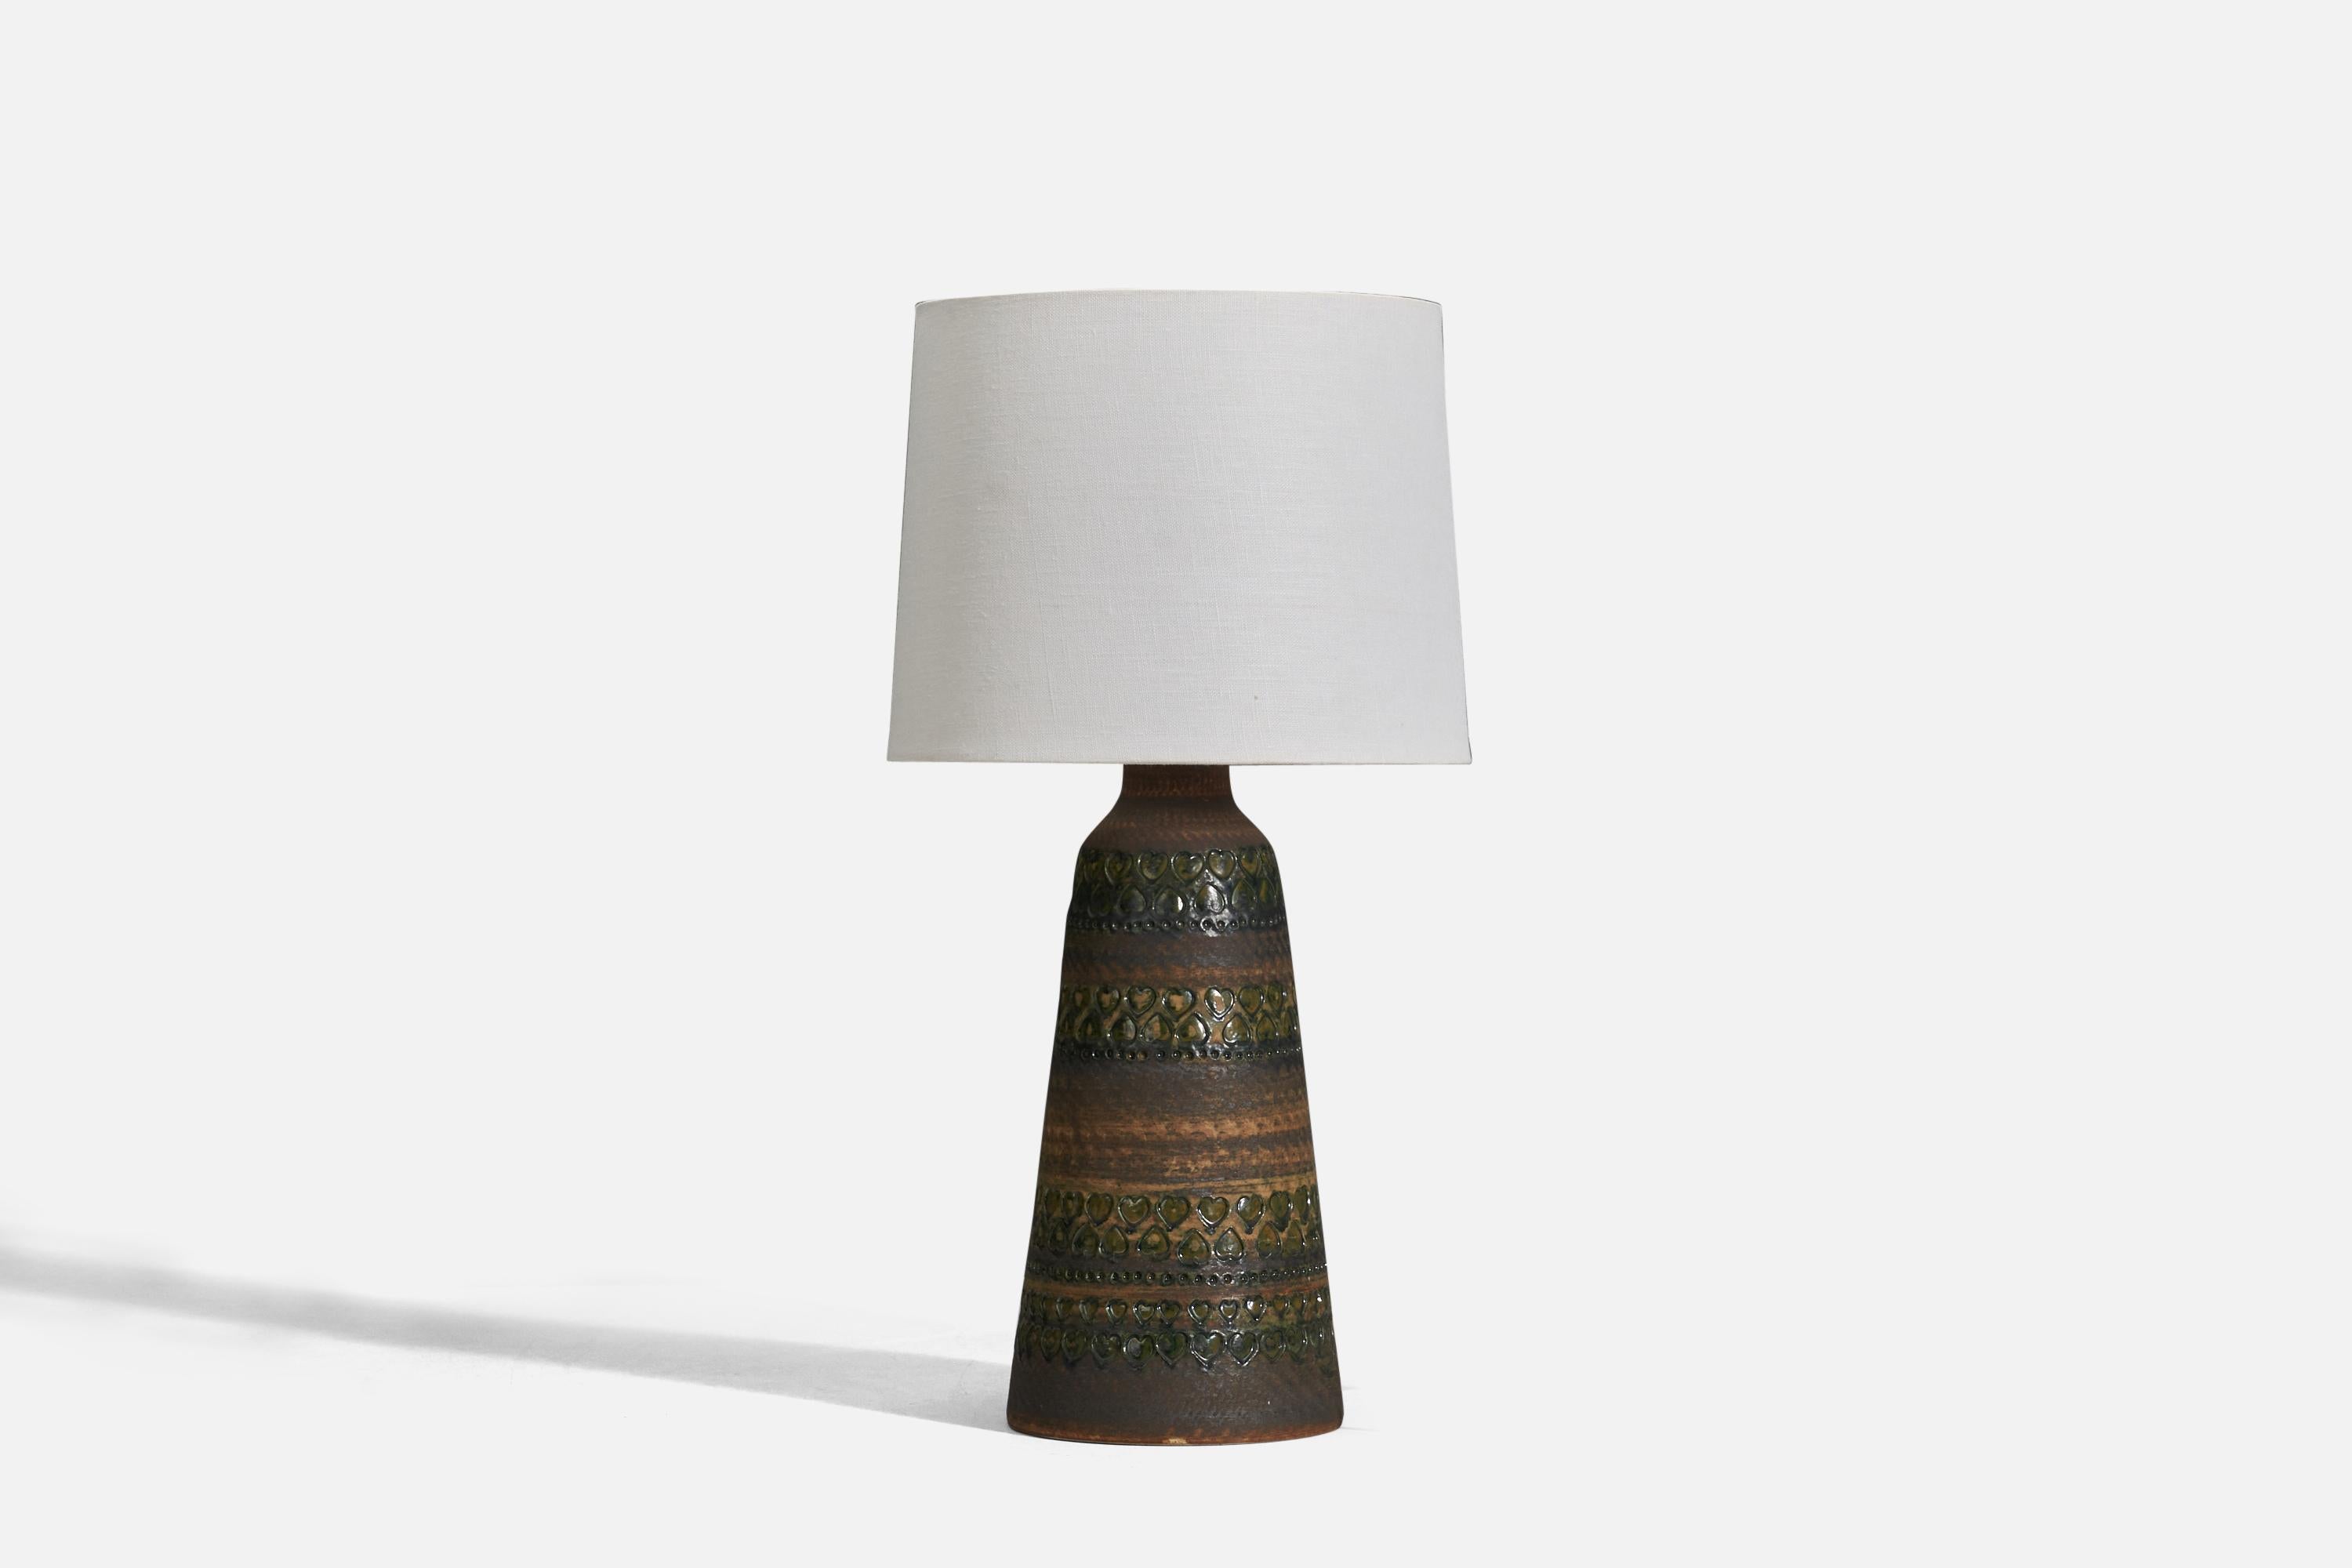 A brown glazed stoneware table lamp designed and produced by Tolla Keramik, Sweden, 1960s.

Sold without Lampshade
Dimensions of Lamp (inches) : 15 x 5.93 x 5.93 (height x width x depth)
Dimensions of Lampshade (inches) : 9 x 10 x 8 (top